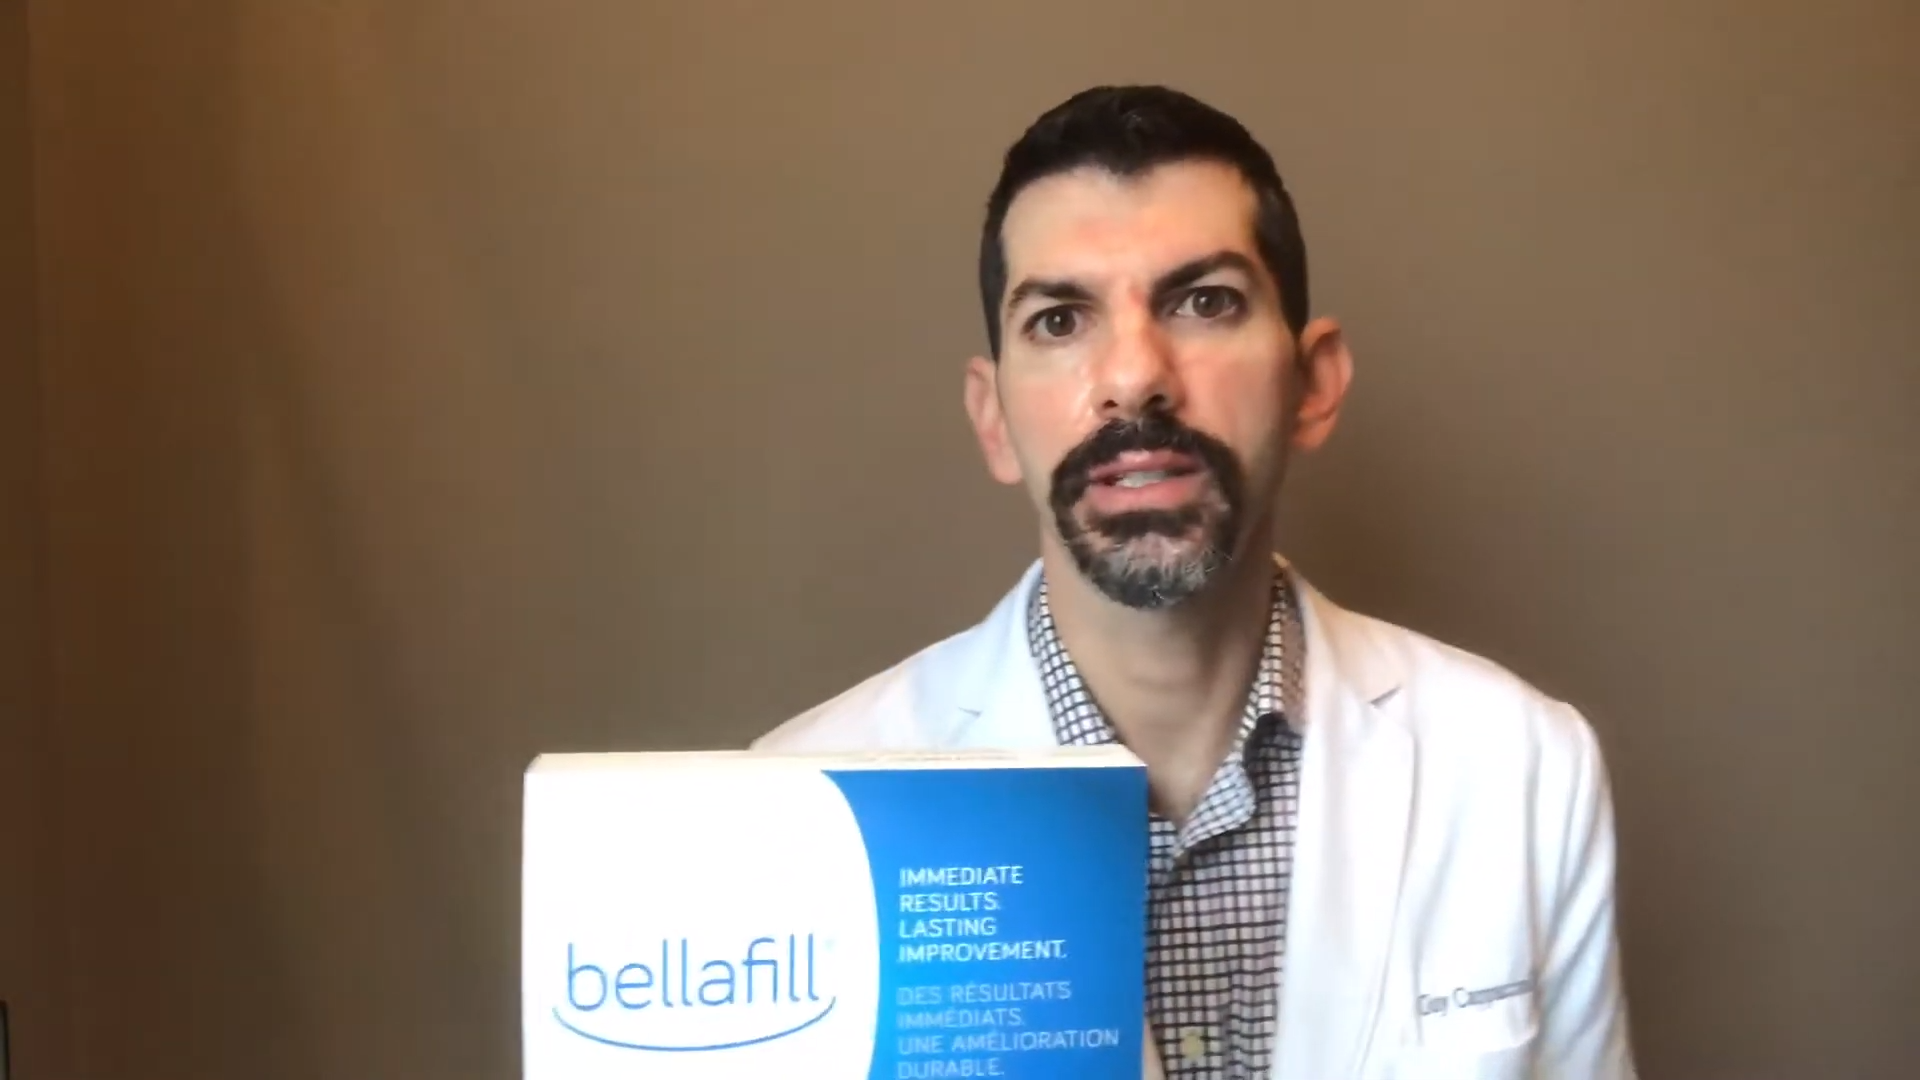 a video still of Dr. Cappuccino talking about the Bellafill product